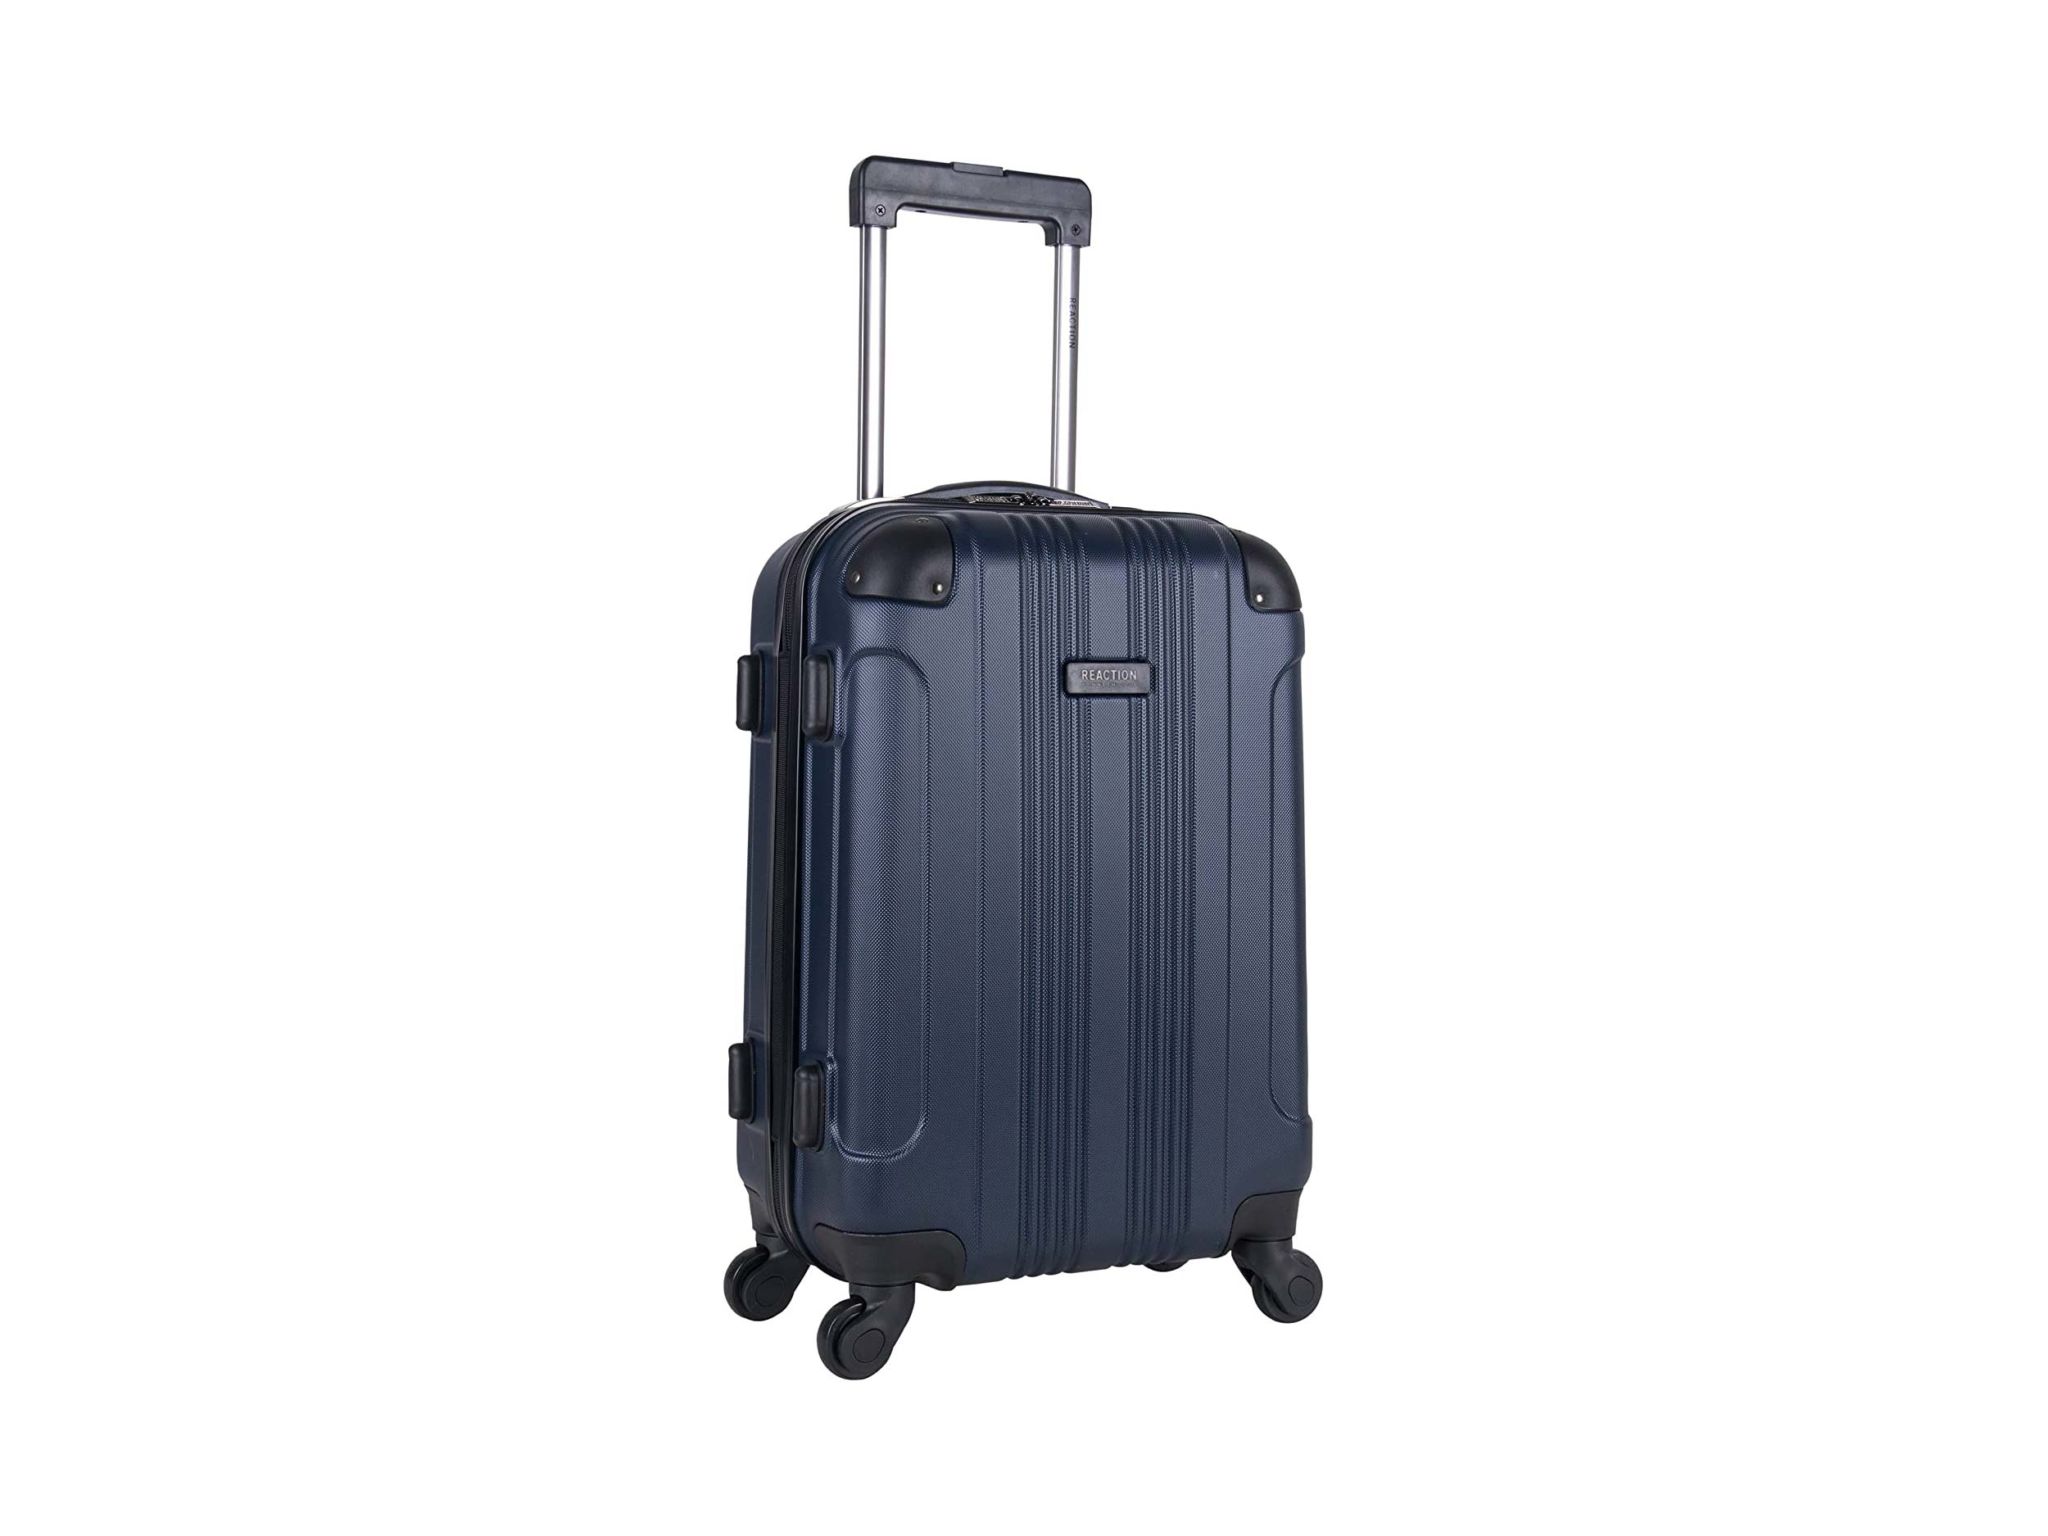 Kenneth Cole Reaction Out of Bounds 20-Inch Carry-On